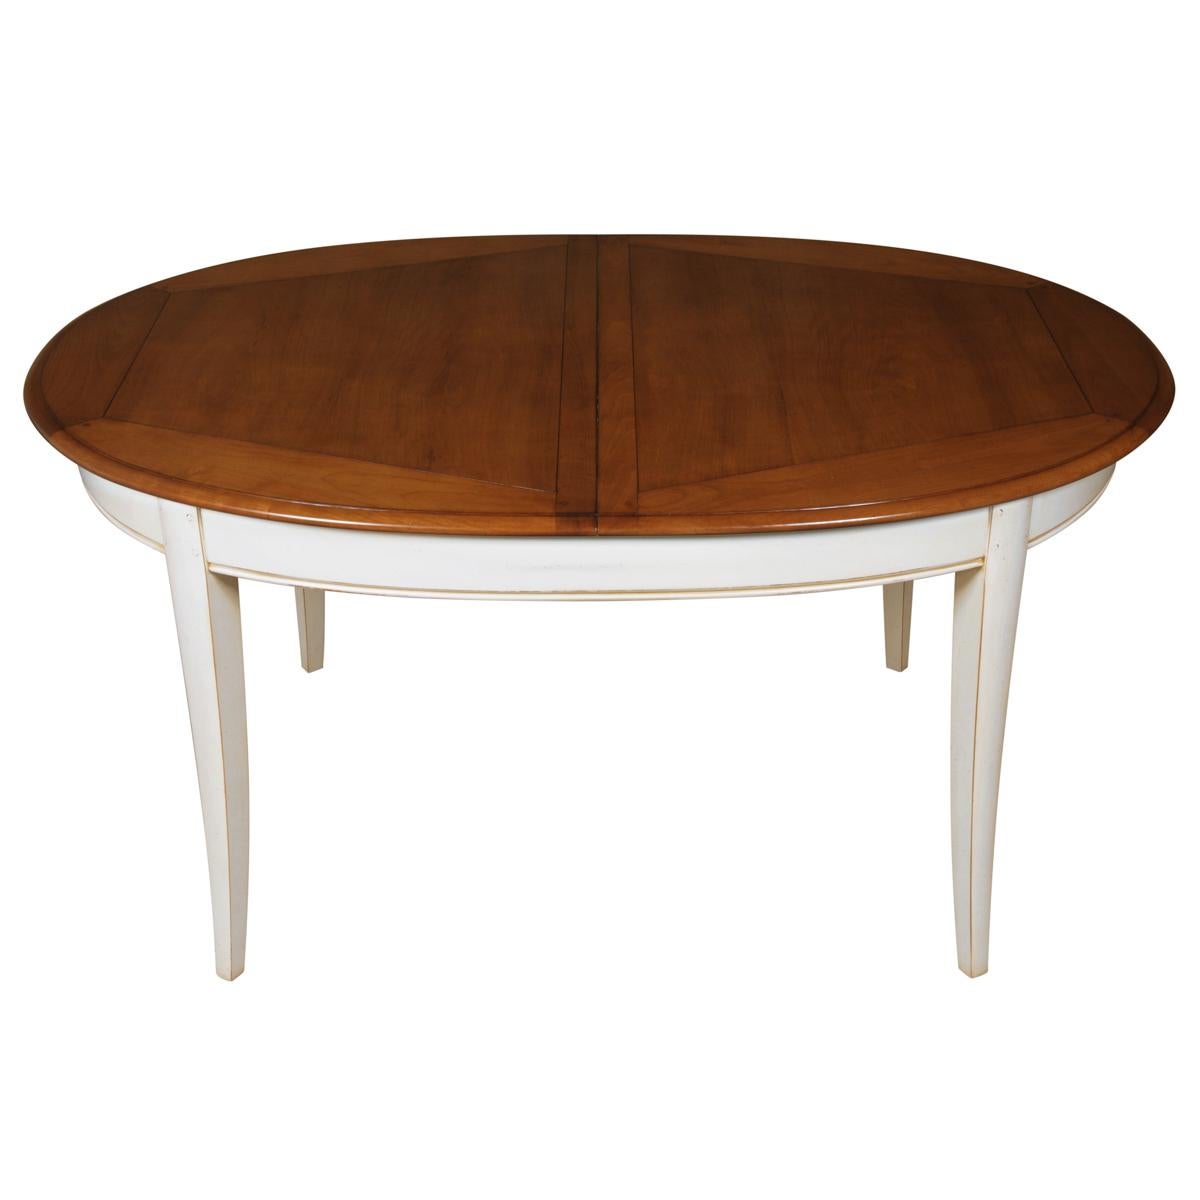 Cherry French Provincial Style Extensible Oval Table with a Light White Cream Finish For Sale